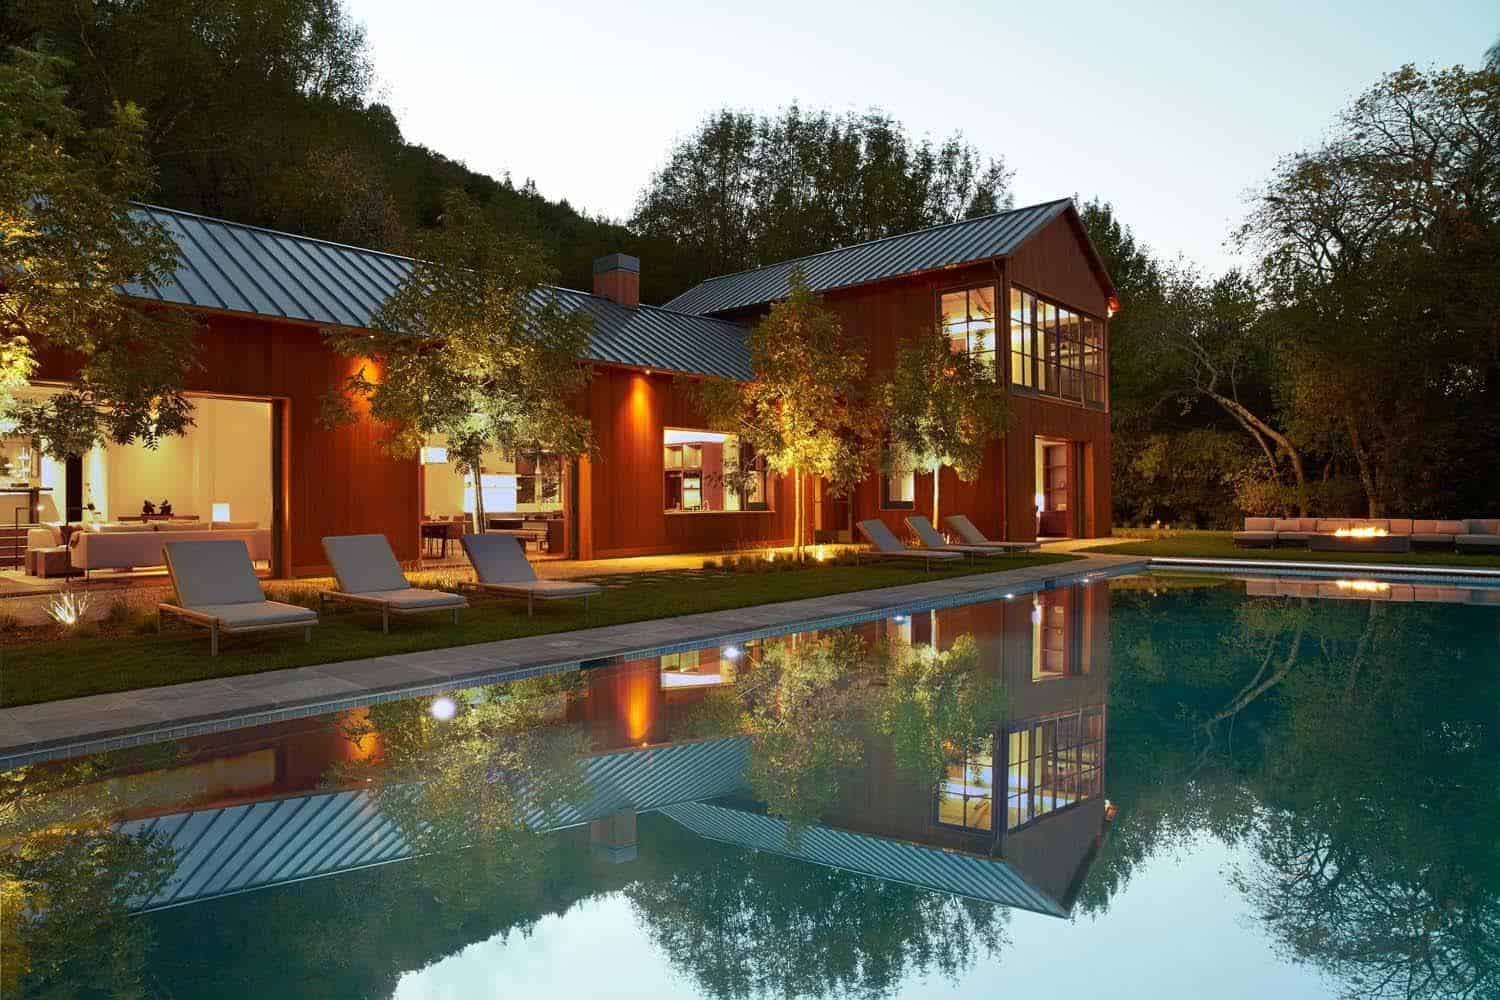 Delightful Sonoma wine country weekend retreat for relaxation